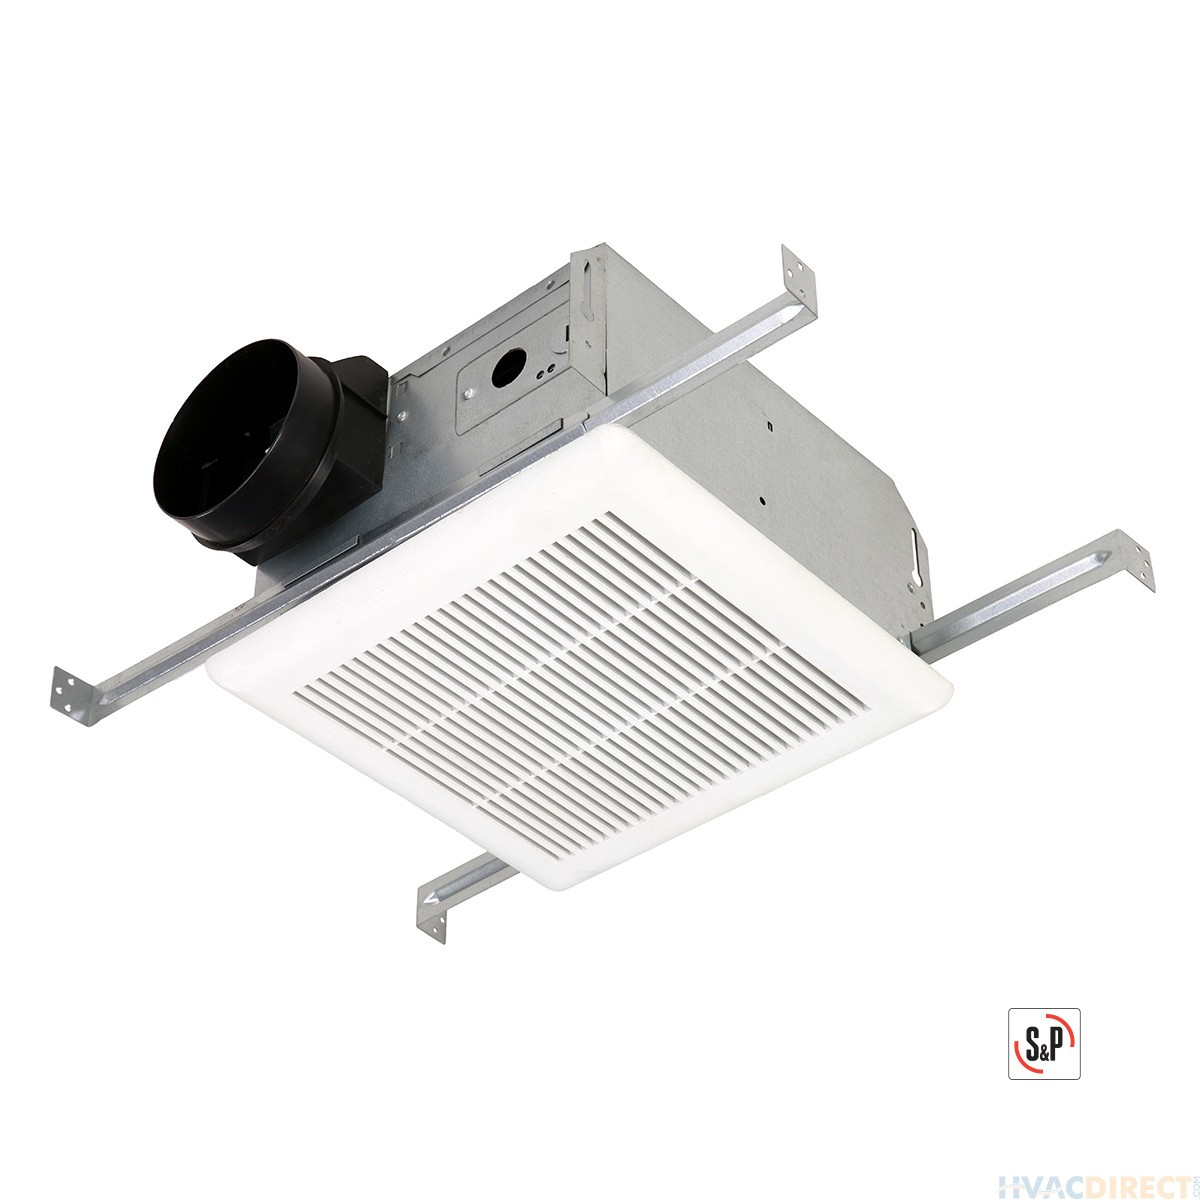 Sp Premium Choice Ceiling Mounted Bathroom Exhaust Fan 80 Cfm Pcv80 pertaining to sizing 1200 X 1200